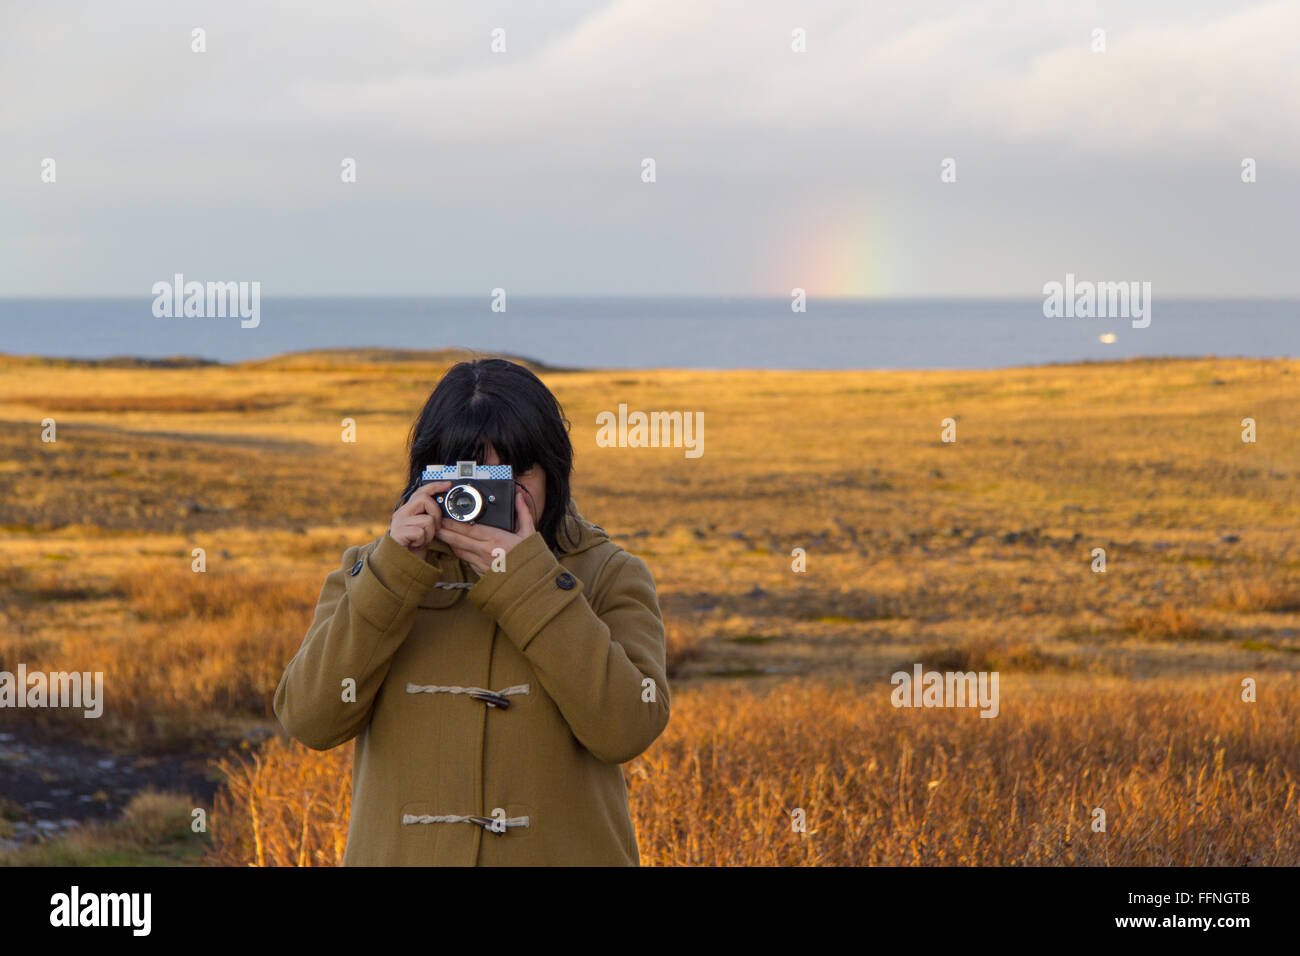 A woman takes a picture in a sunny afternoon in Snaefellsjoekull peninsula, Iceland, with a Diana camera and the rainbow behind Stock Photo